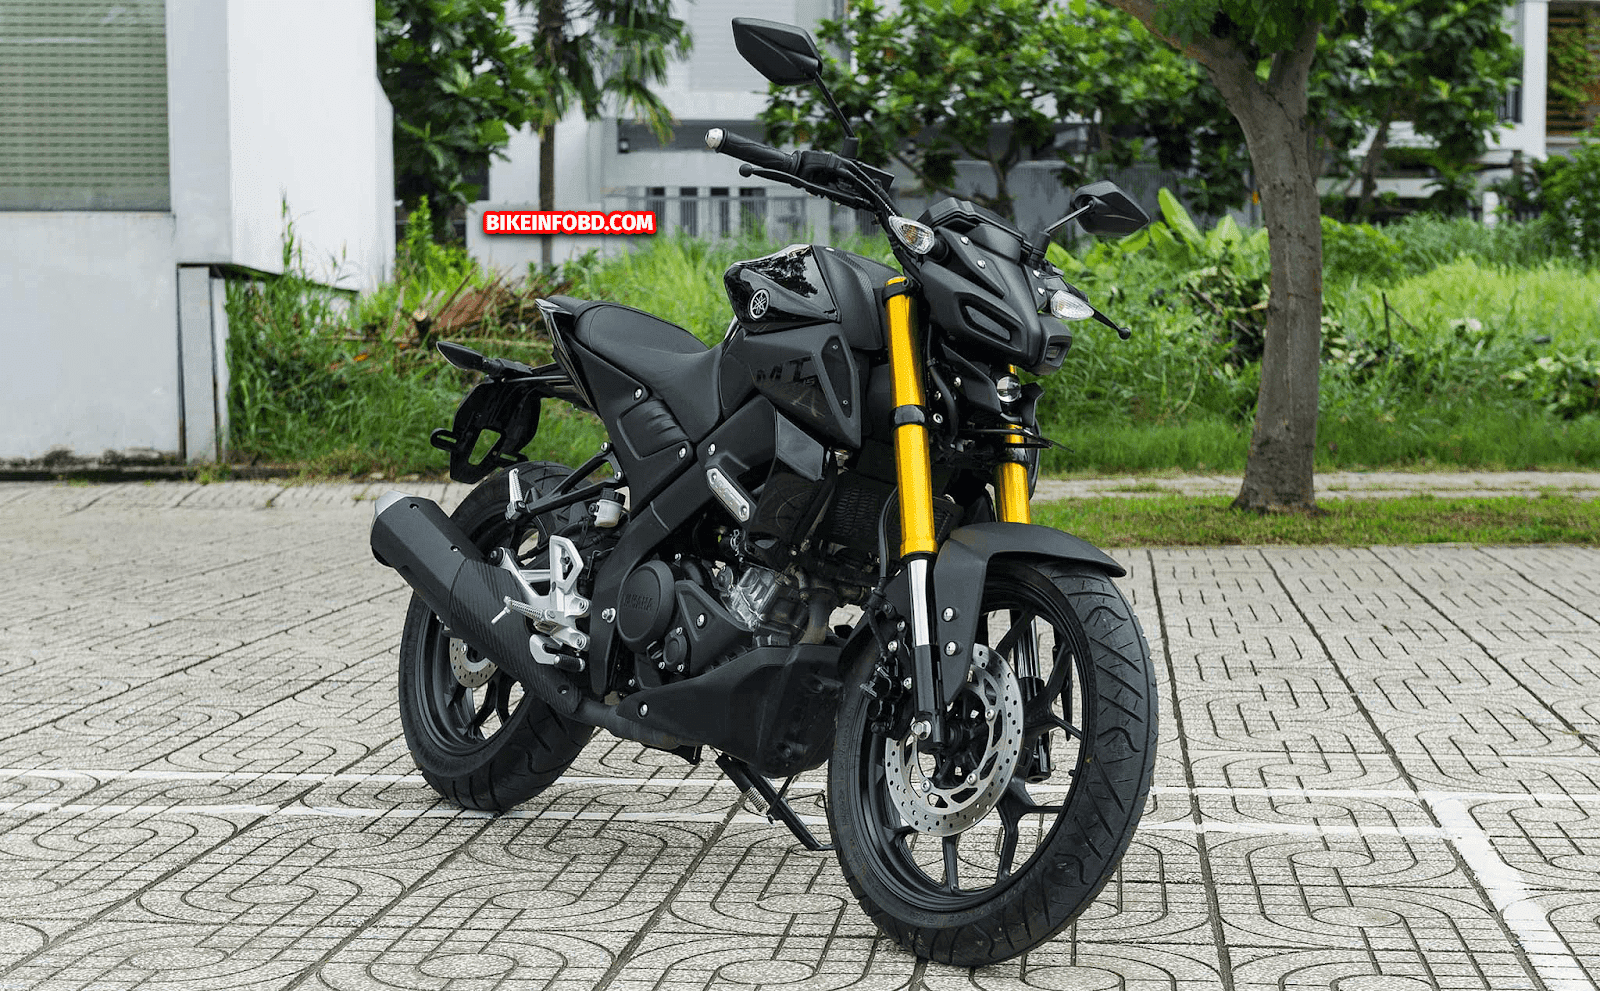 Yamaha MT-15 Price in BD, Specifications, Photos, Mileage, Top Speed & More